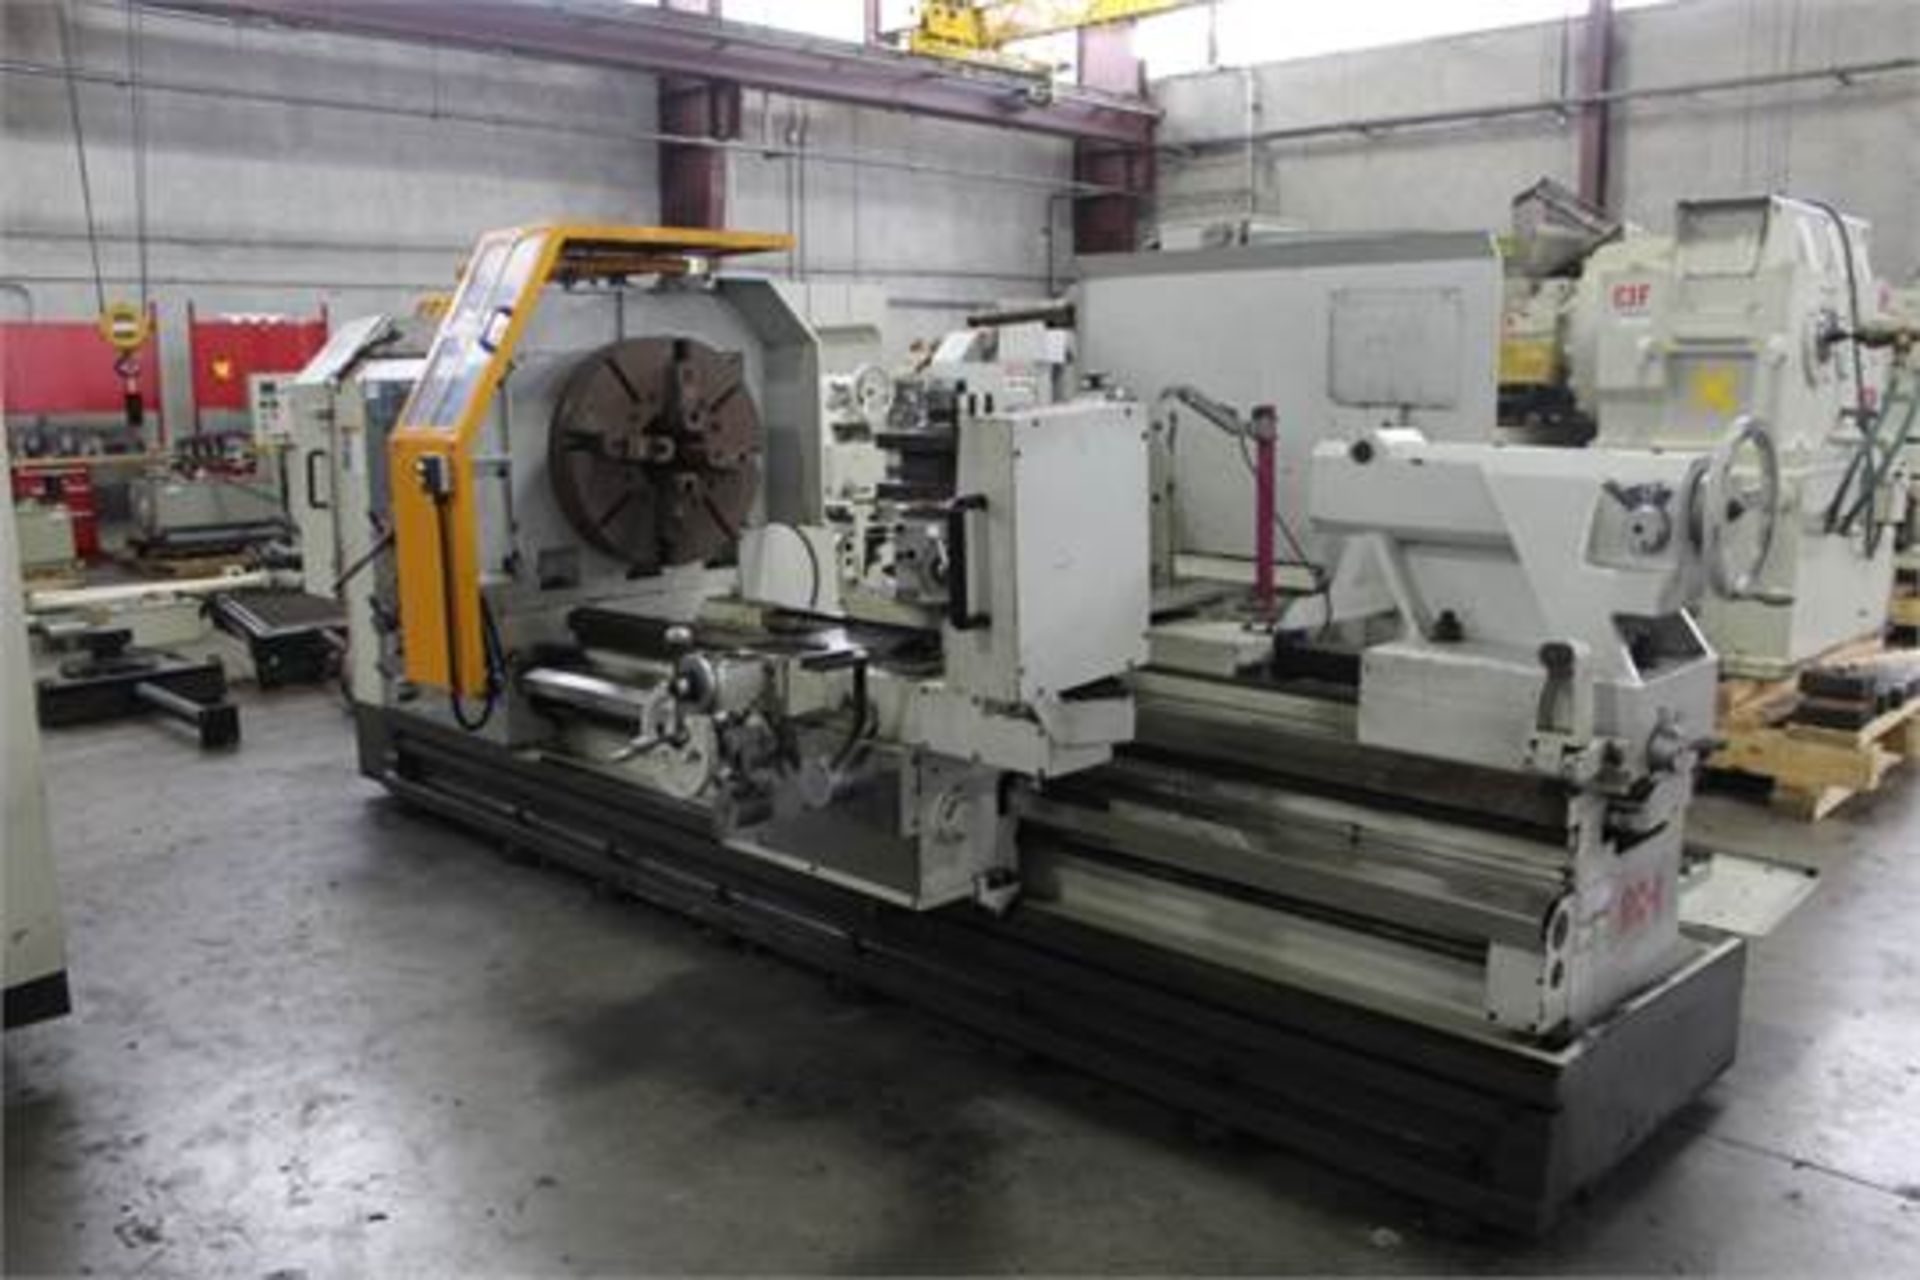 Eisen PA35 Heavy Duty Hollow Spindle Lathe, 34” swing over bed, 60” center distance, A2-11 Spindle - Image 2 of 5